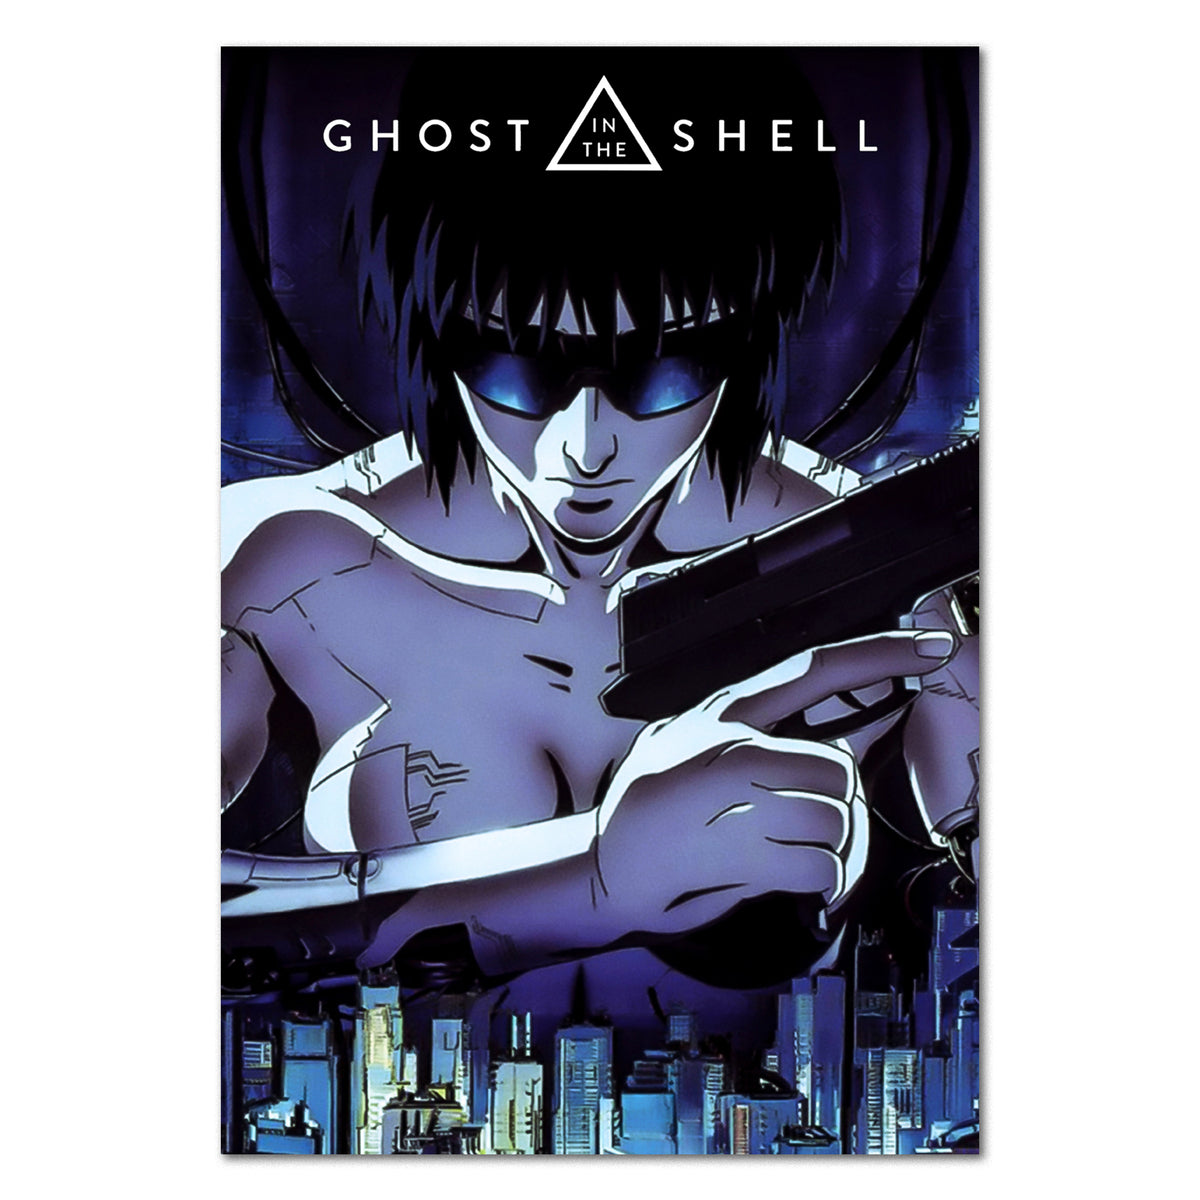 Ghost In The Shell | Ghost in the shell, Anime, Ghost